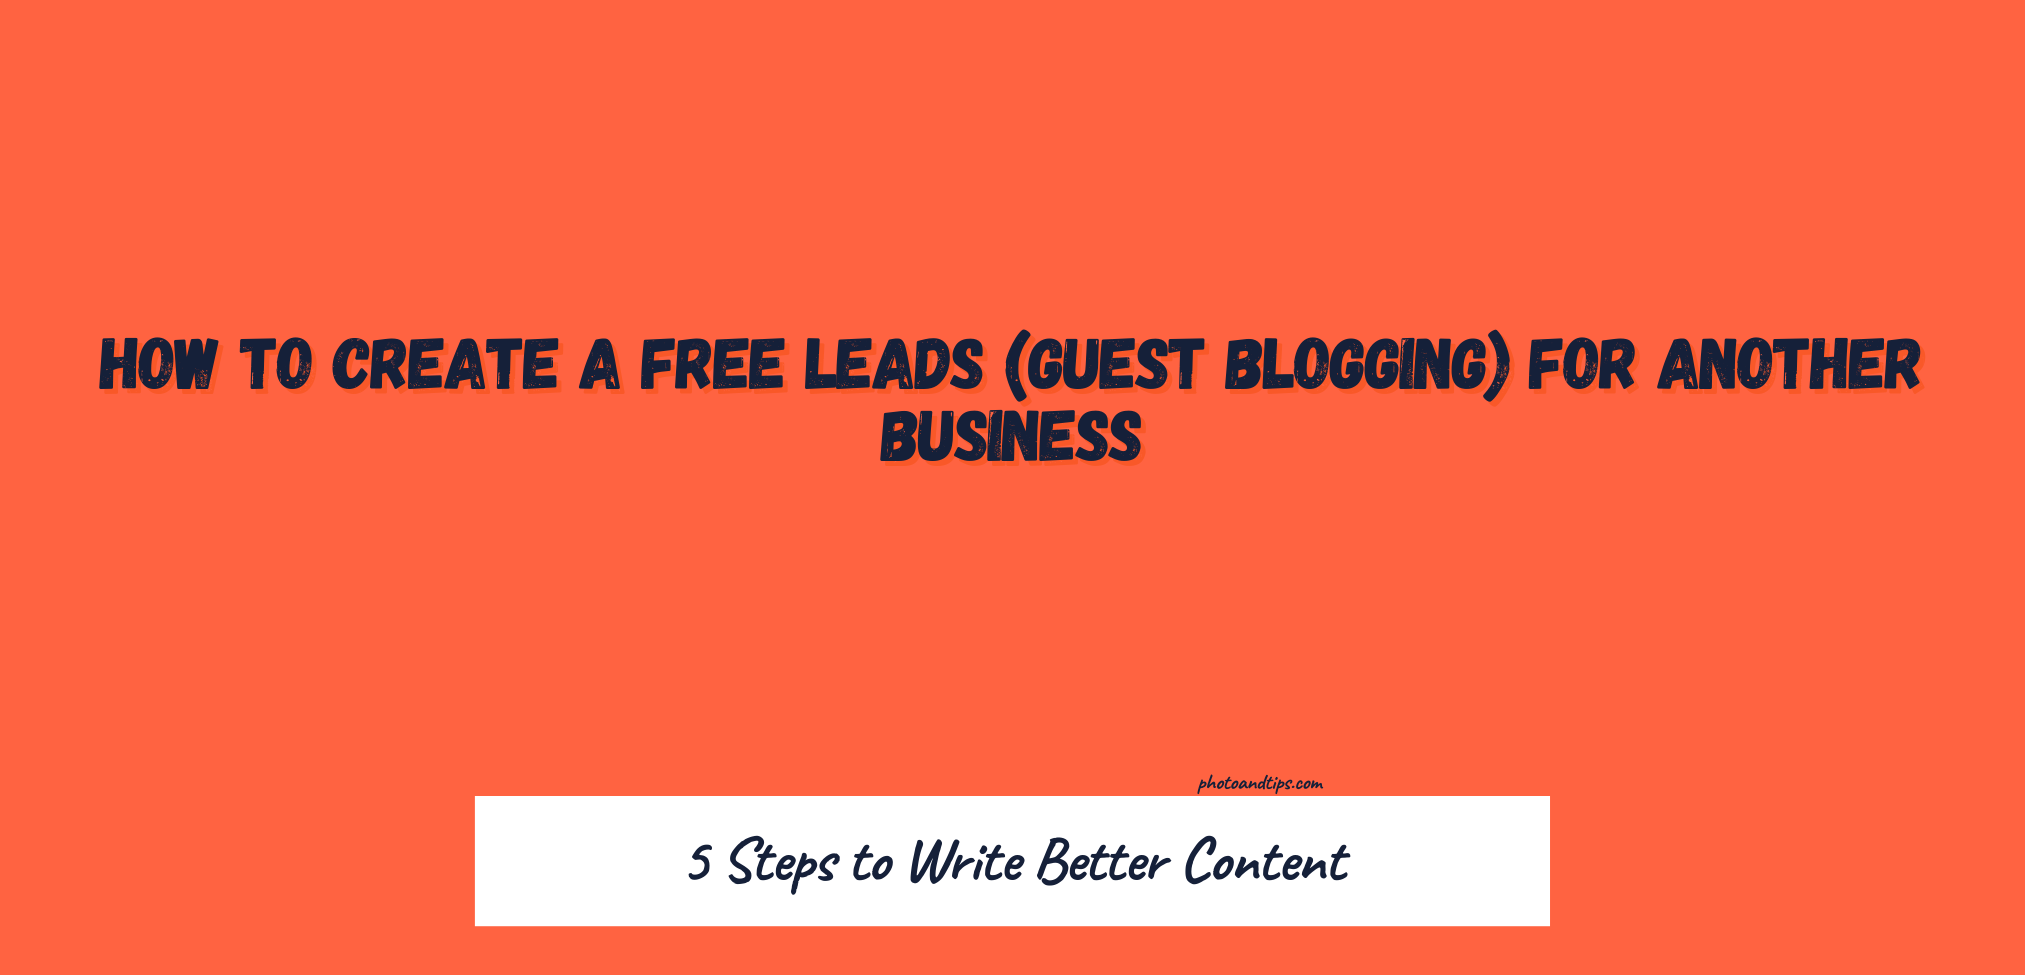 How to Create a Free Leads (Guest Blogging) For Another Business